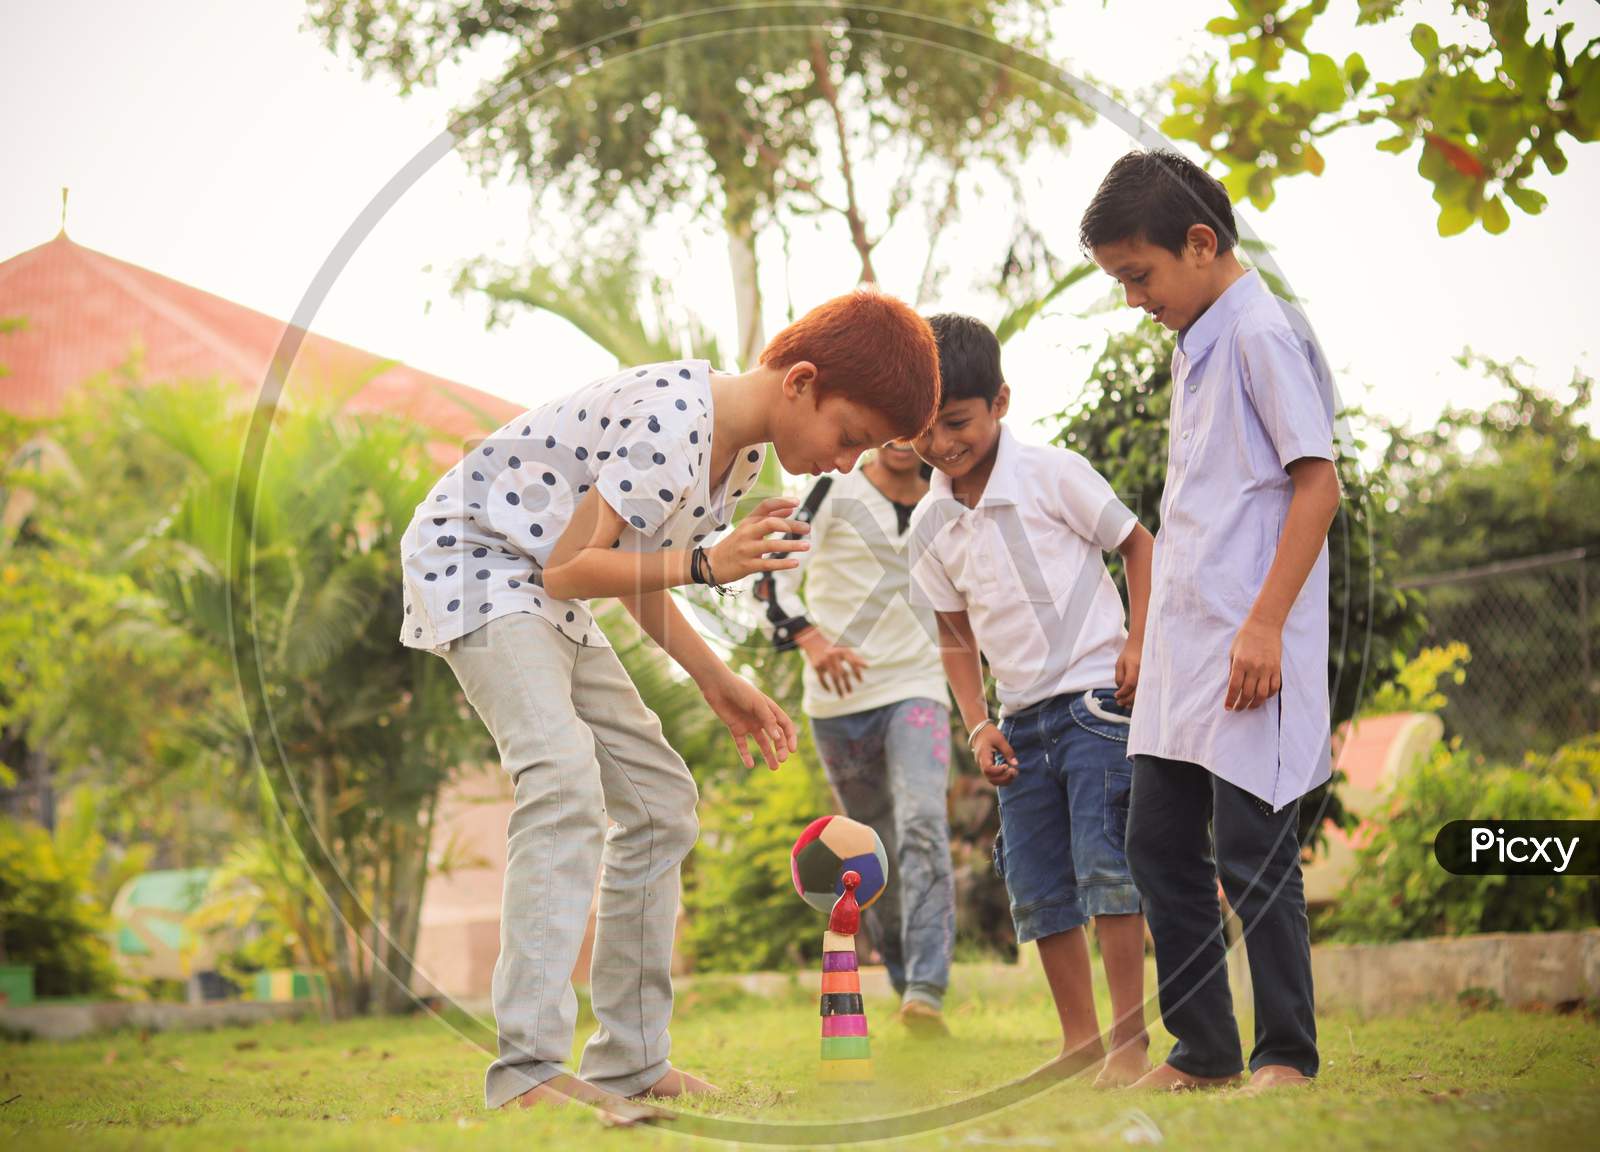 Children Playing Outdoor traditional Games - Concept Of Kids Enjoying Outdoor Games In Technology-Driven World.